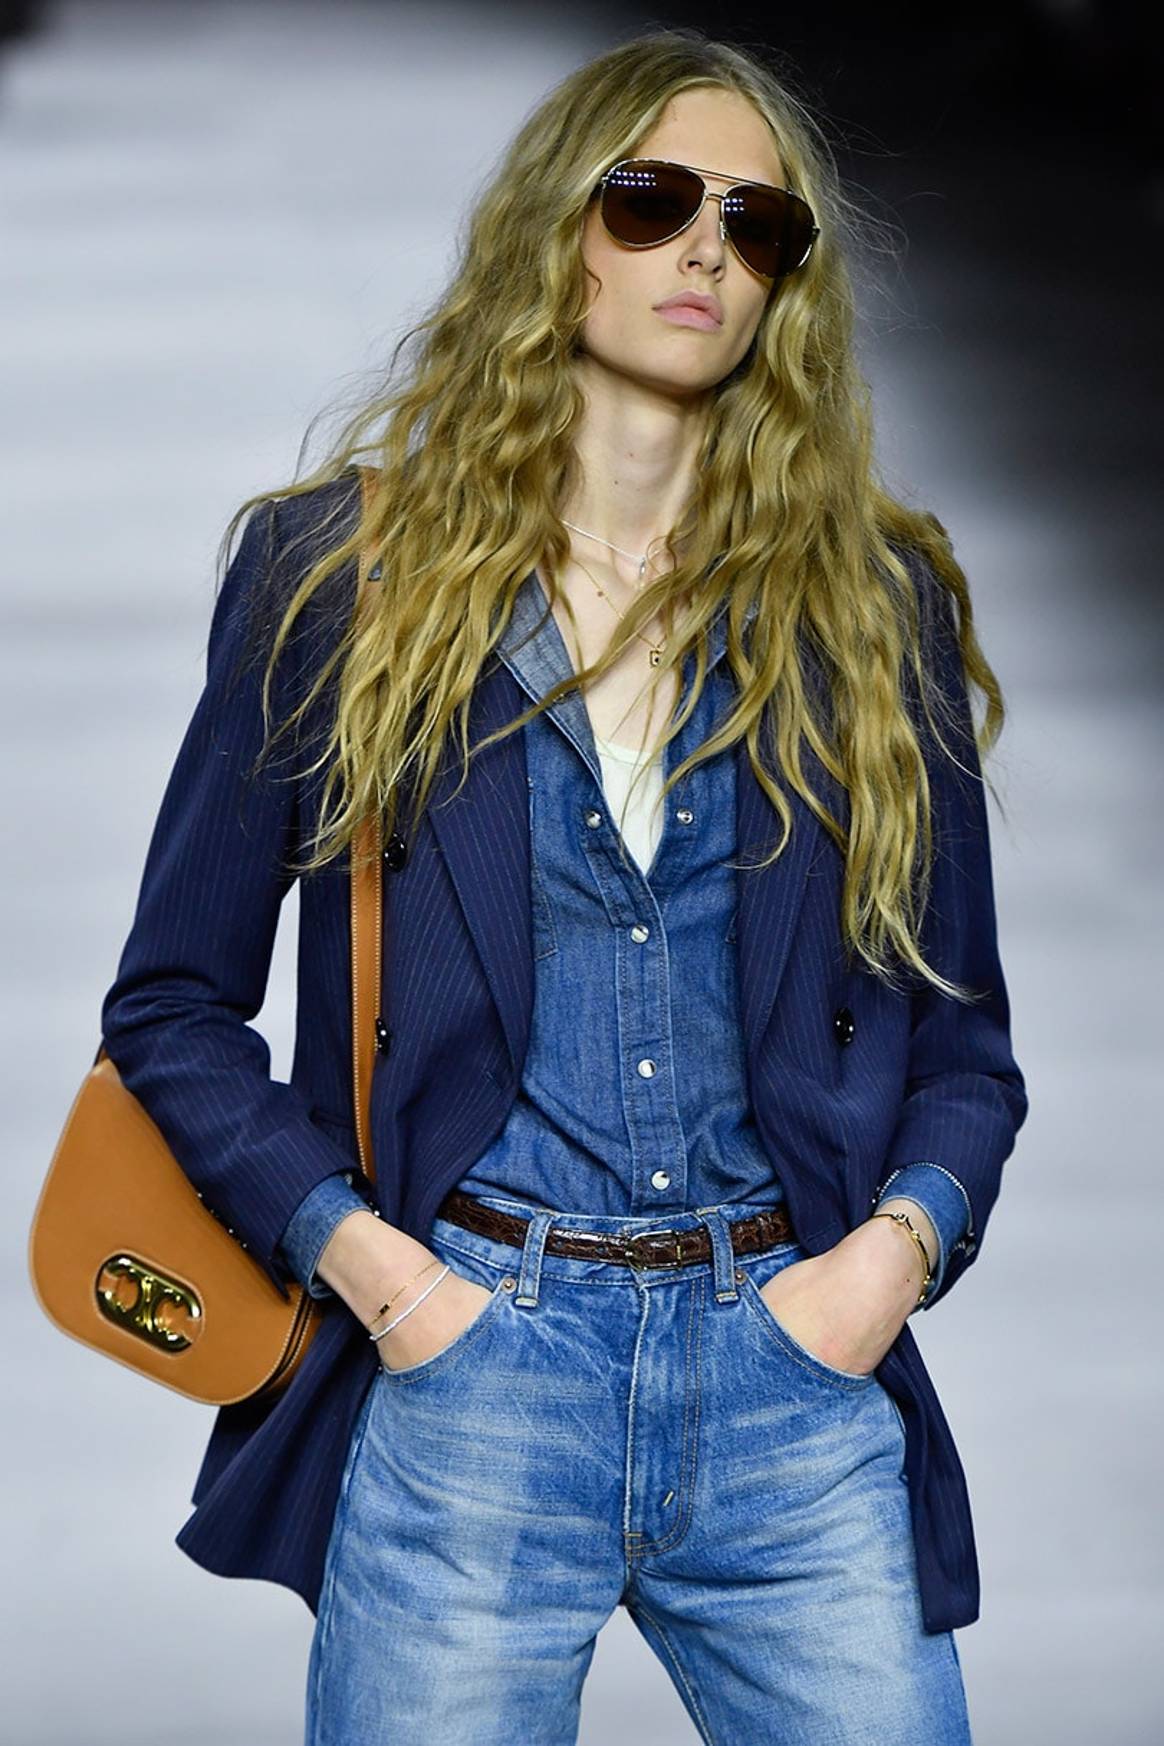 In Paris, denim on the catwalk leaves little to want for